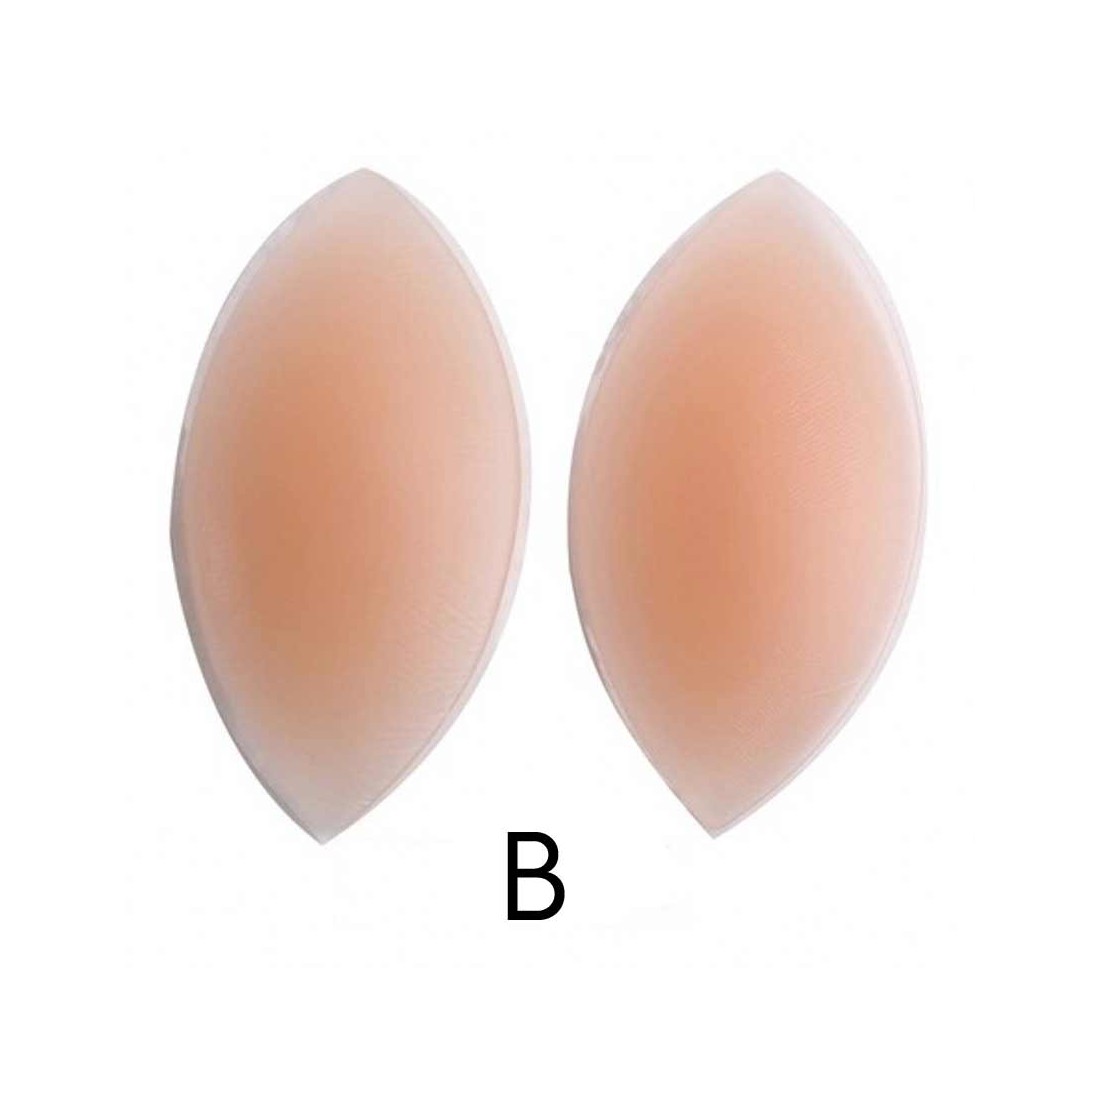 Breast Enhancing Silicone Bra Inserts